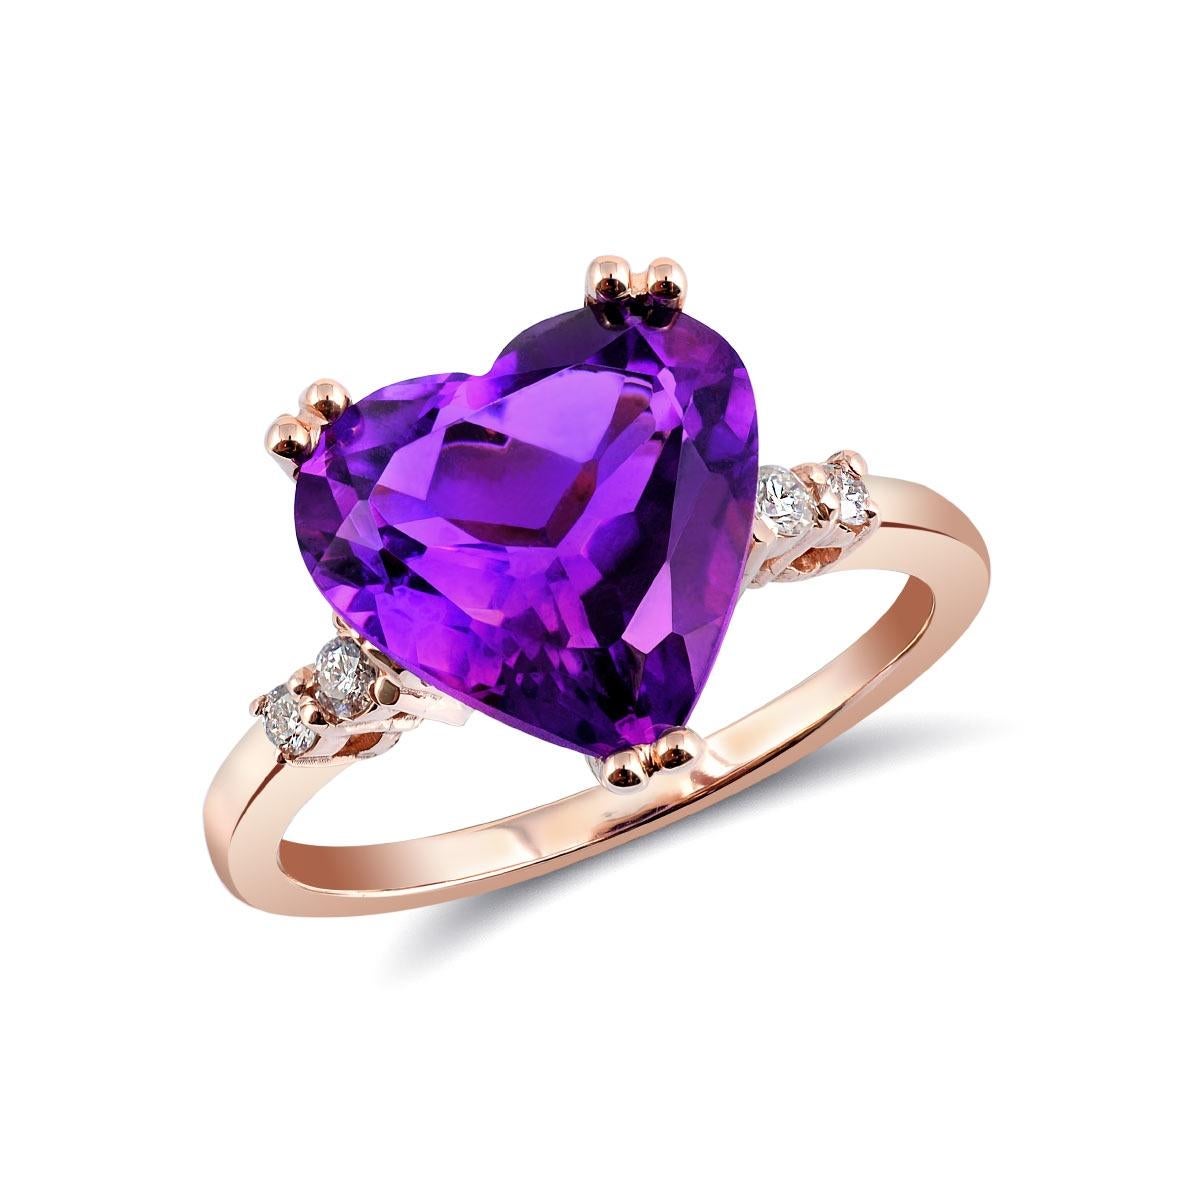 3.61 Carats Amethyst Diamonds set in 14K Rose Gold Ring In New Condition For Sale In Los Angeles, CA